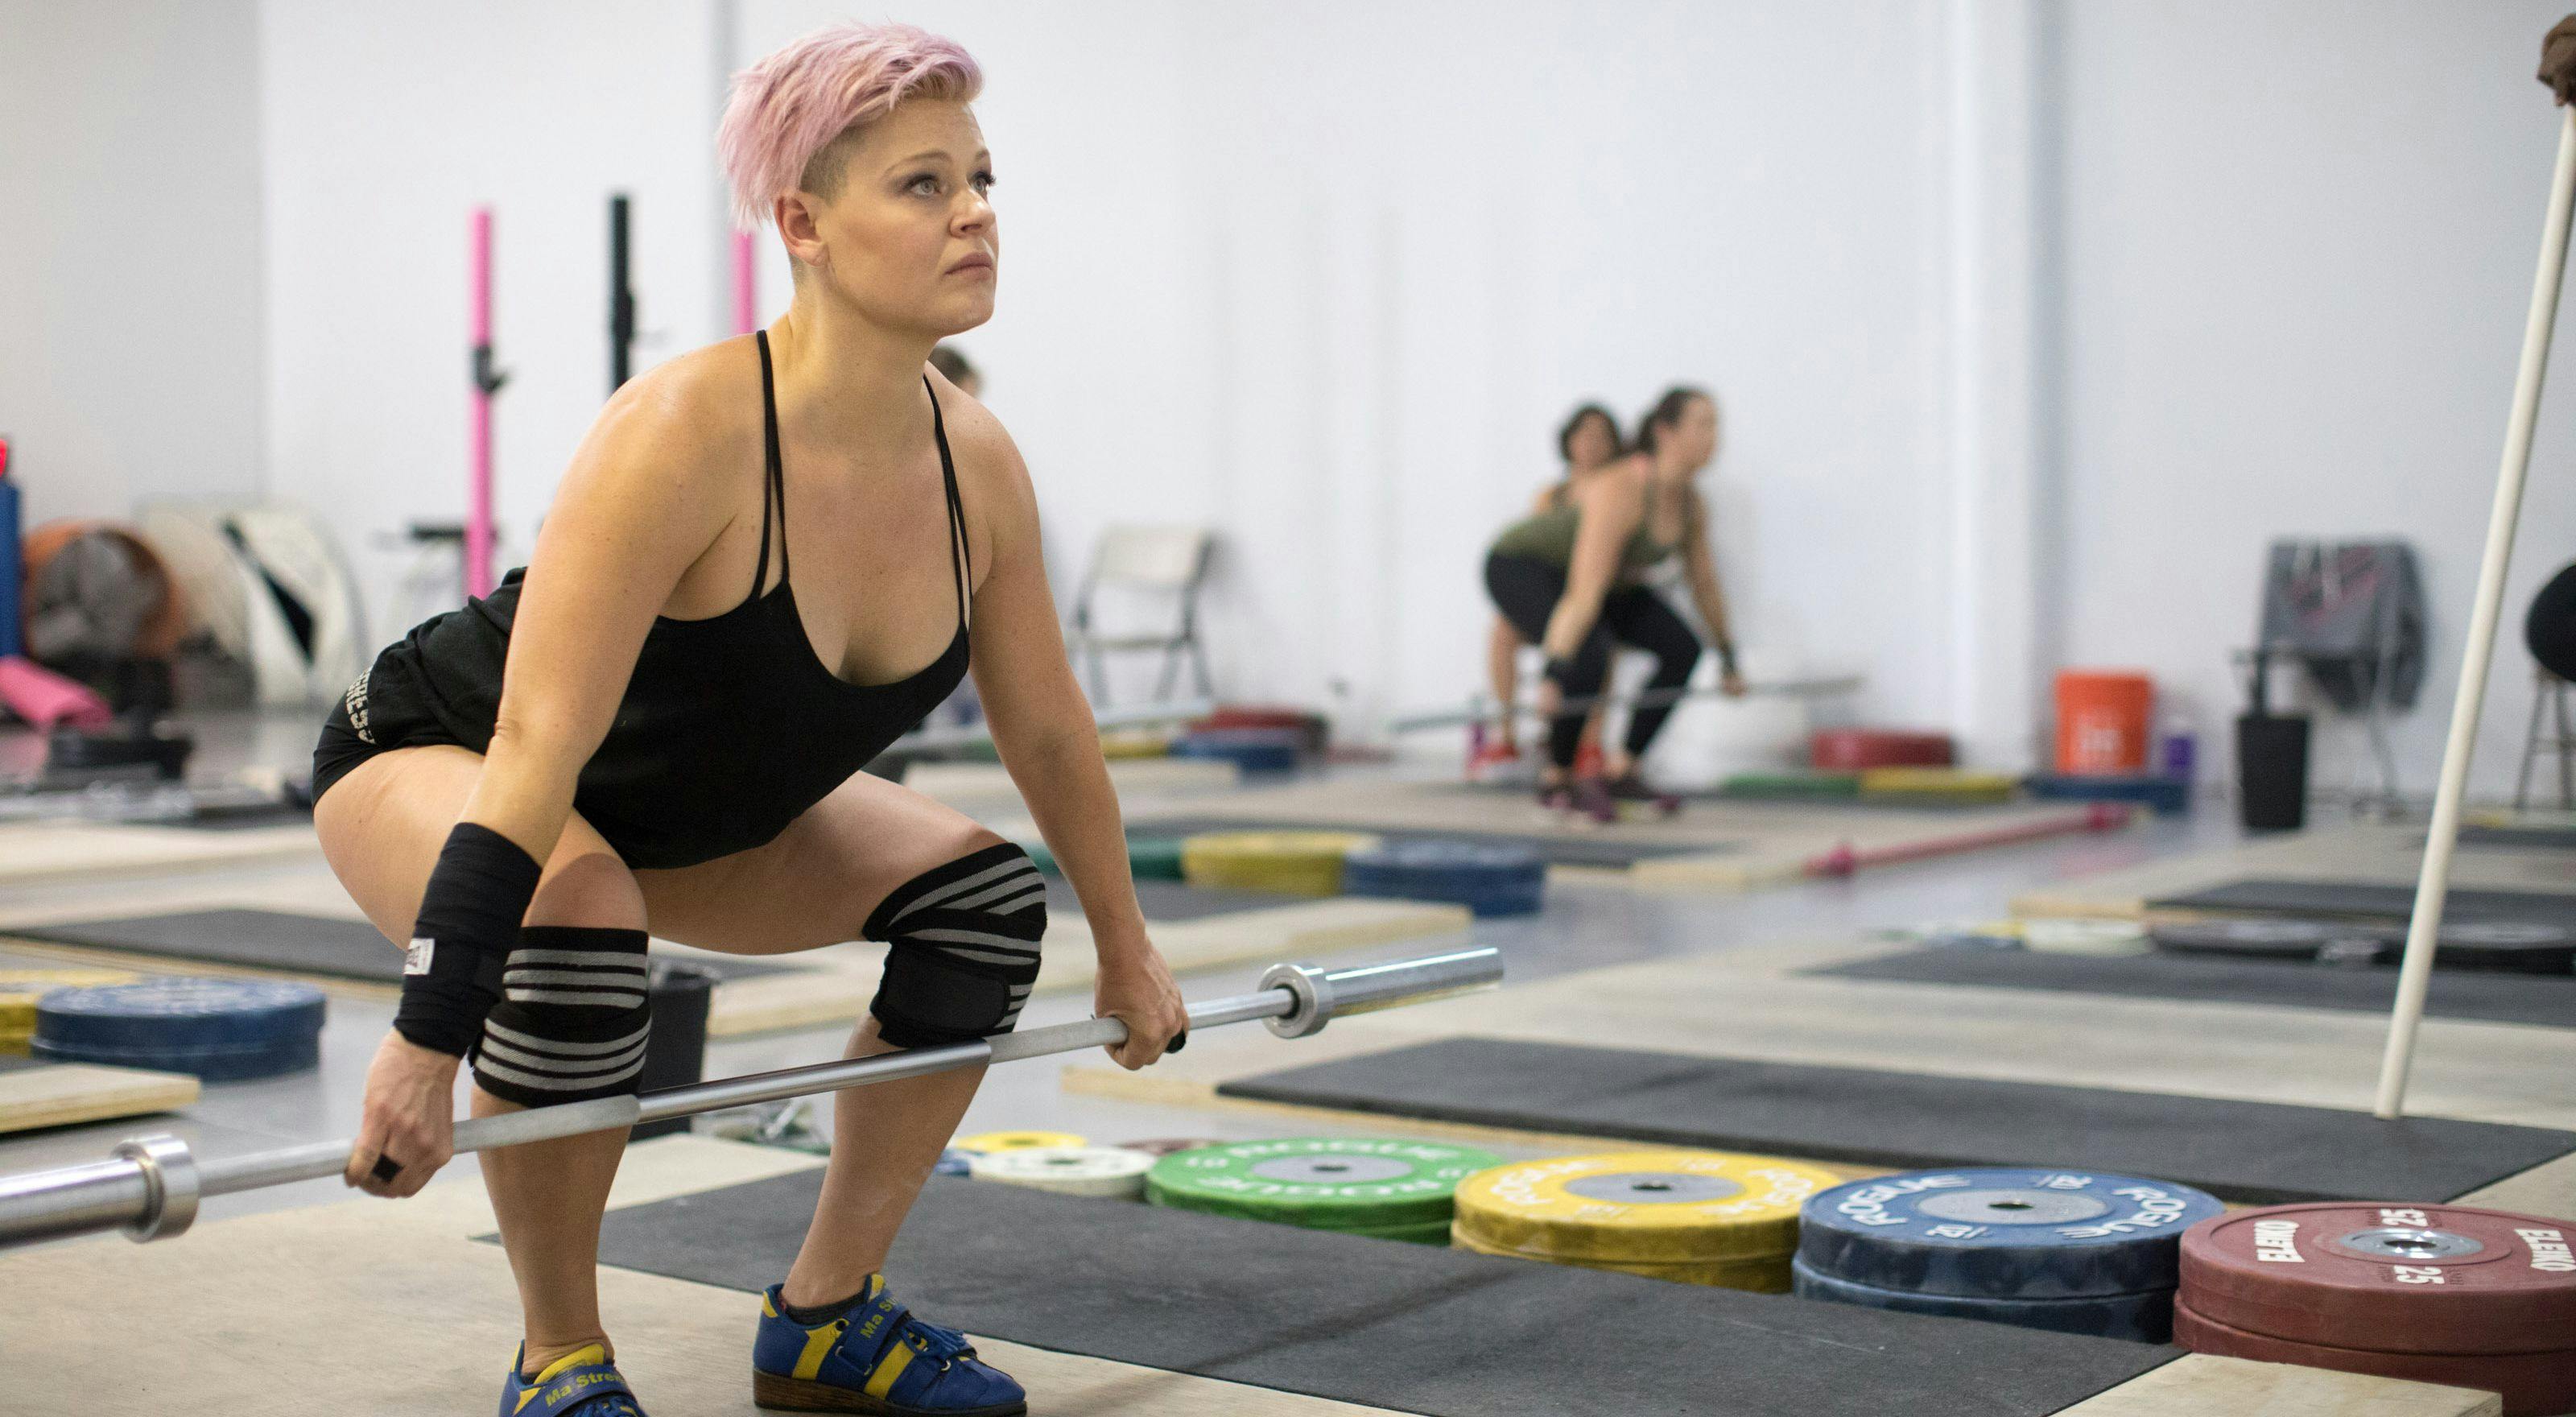 Barbells for Boobs Strengthens the Fight Against Breast Cancer